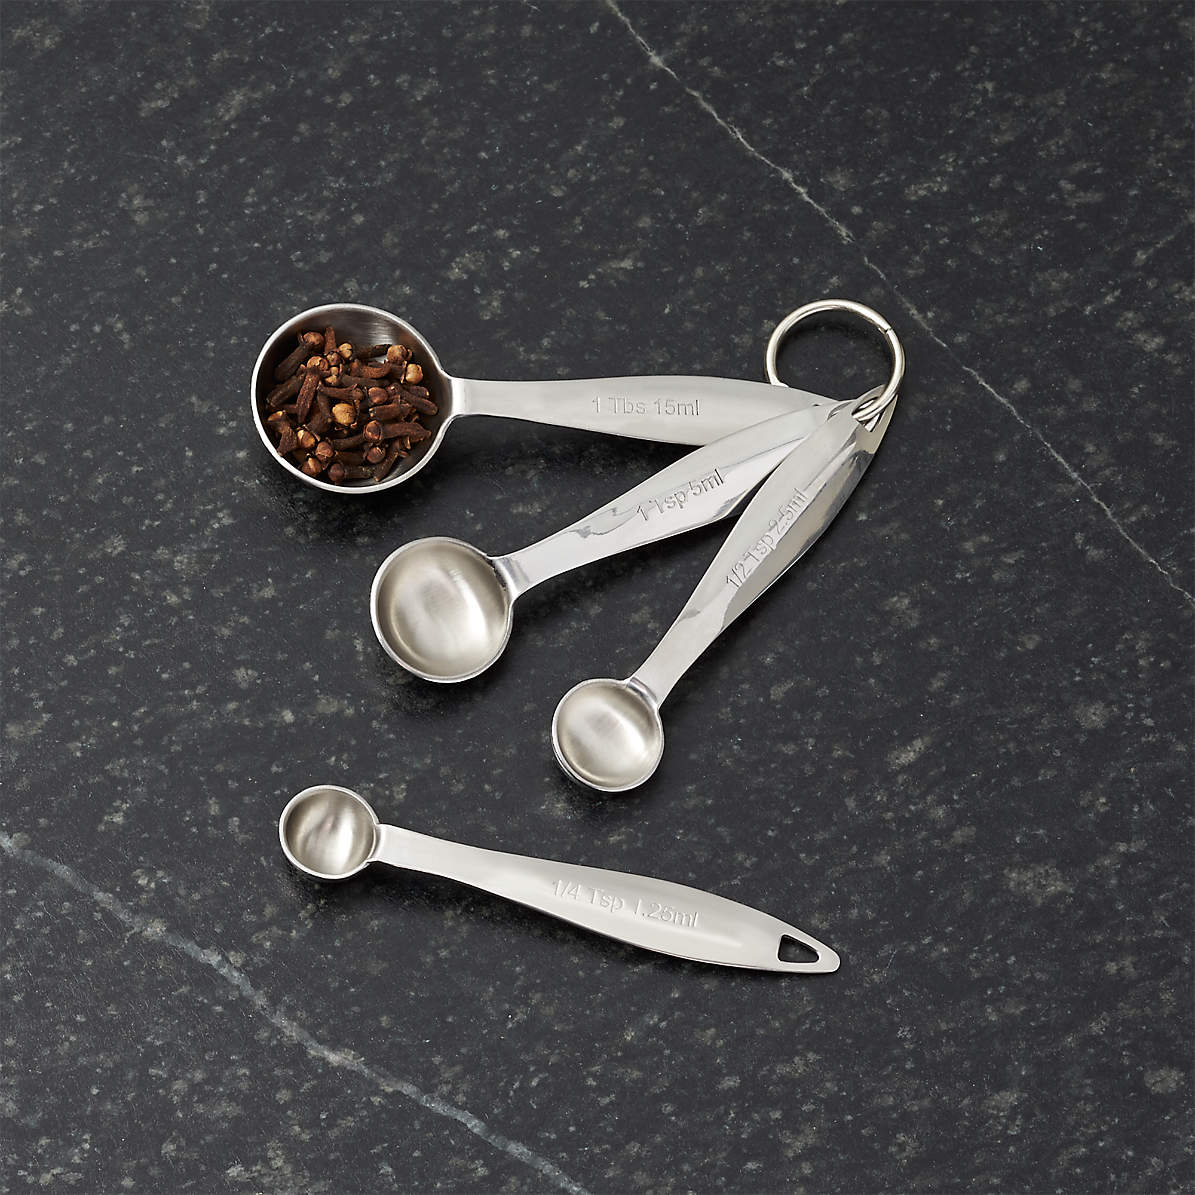 4 Piece Stainless Steel Measuring Spoon Set with Gray Handle